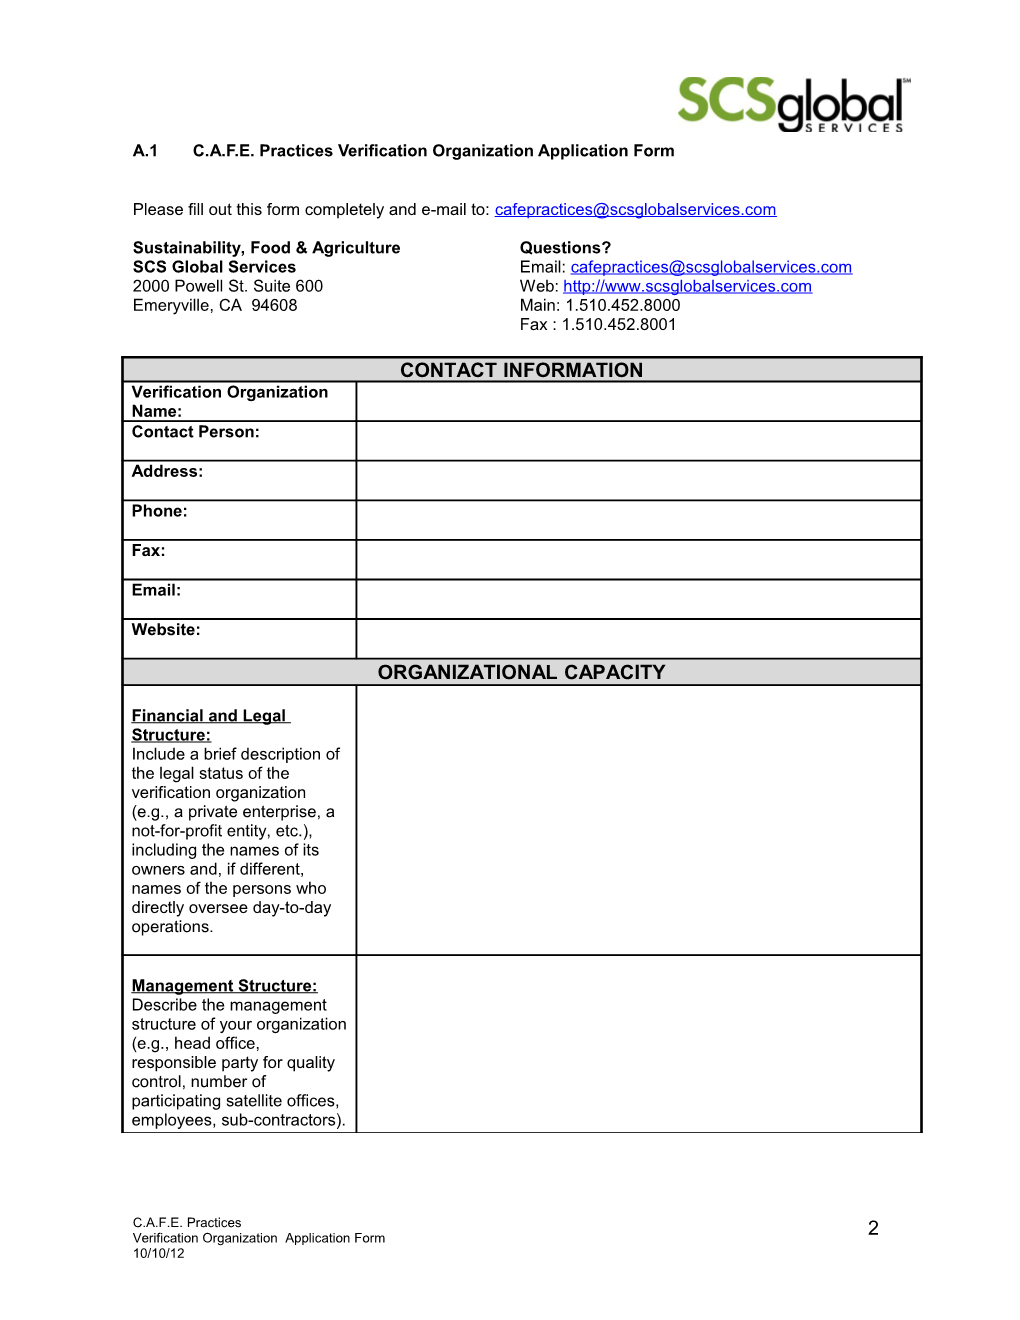 Please Fill out This Form Completely and E-Mail To